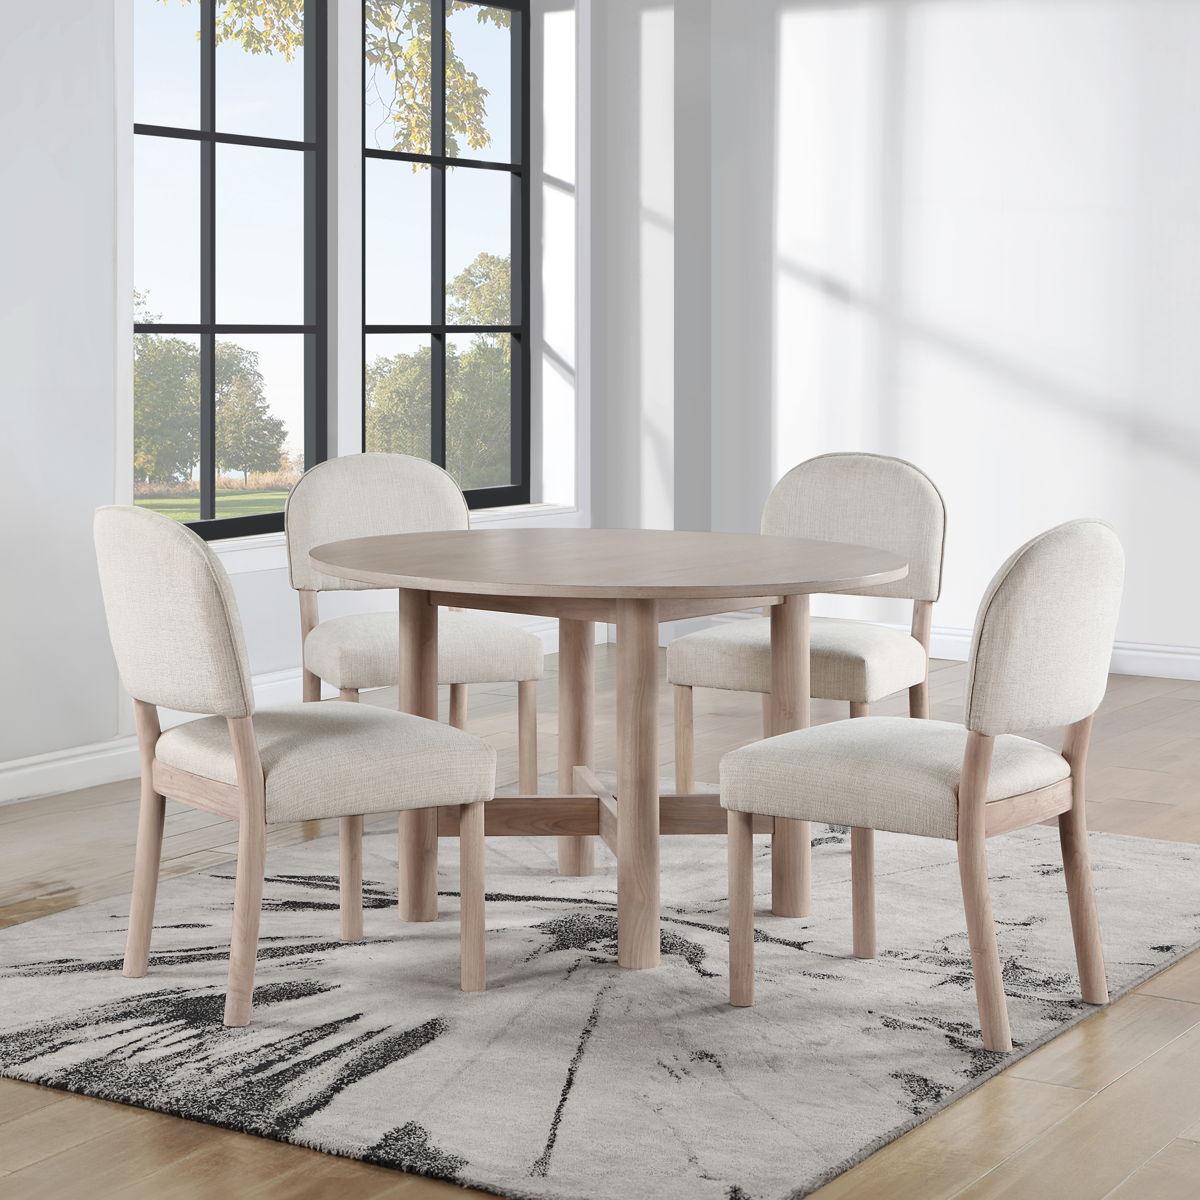 Steve Silver Furniture - Gabby - Round 5 Piece Dining Set (Round Table, 4 Side Chairs) - Light Brown - 5th Avenue Furniture